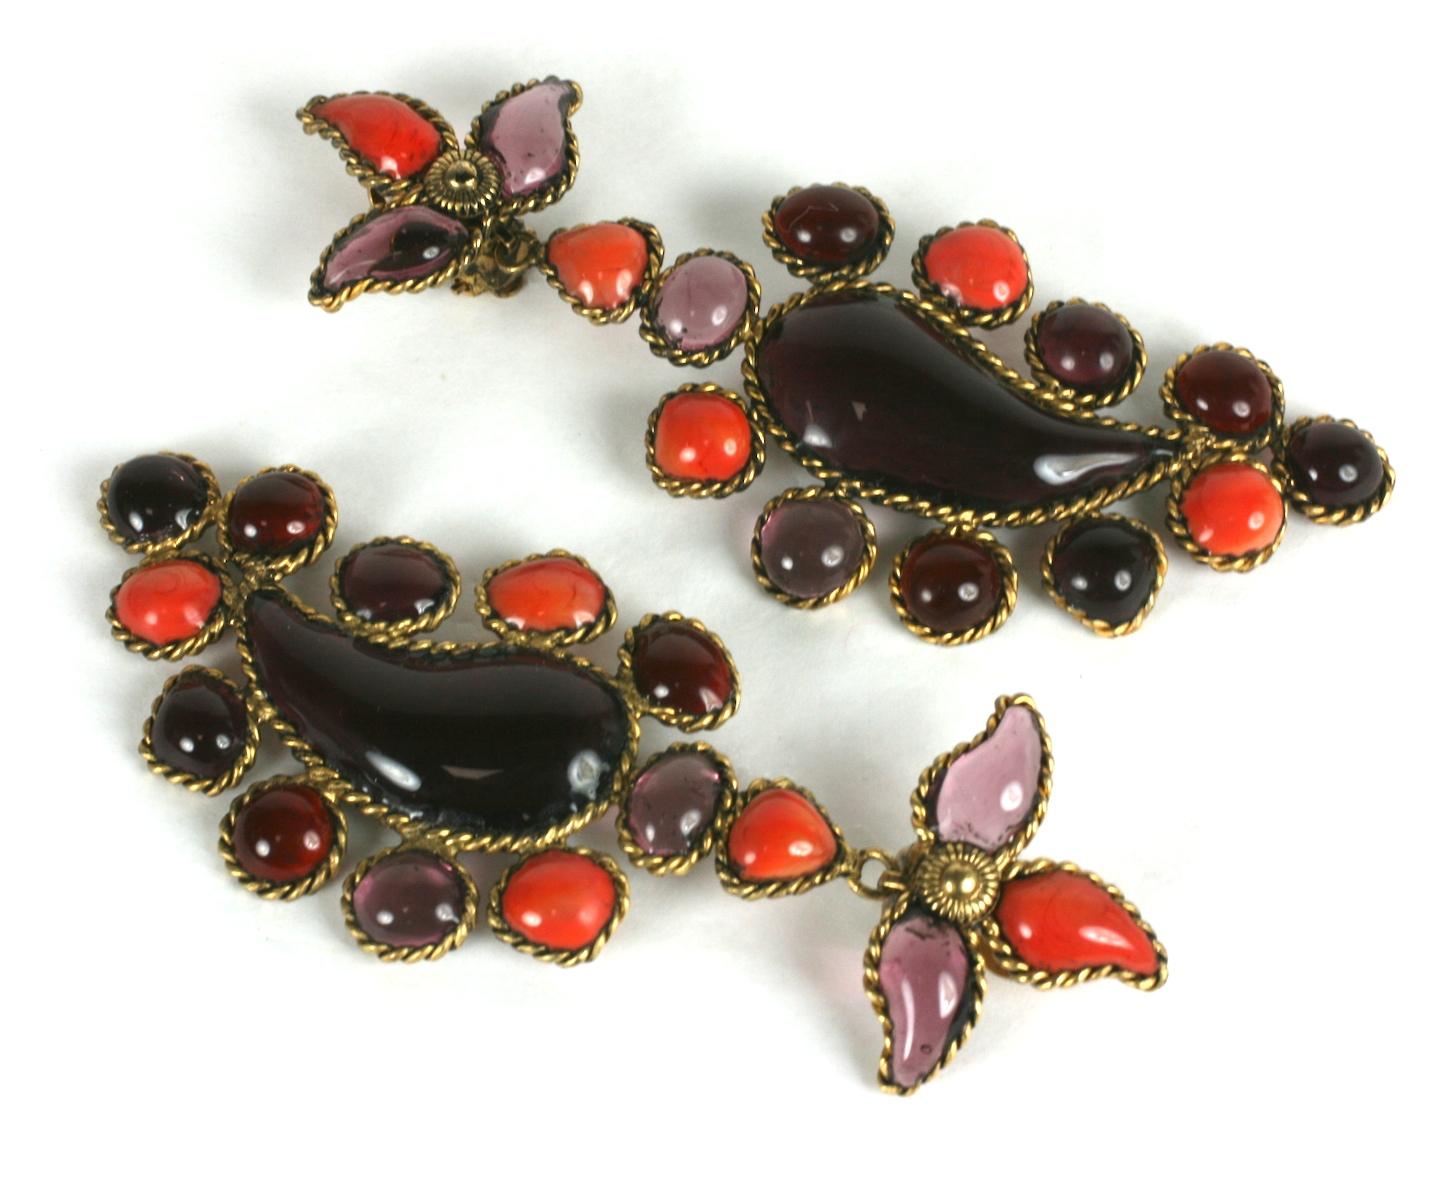  Maison Gripoix for Yves Saint Laurent Haute Couture Palmette Earclips In Excellent Condition For Sale In New York, NY